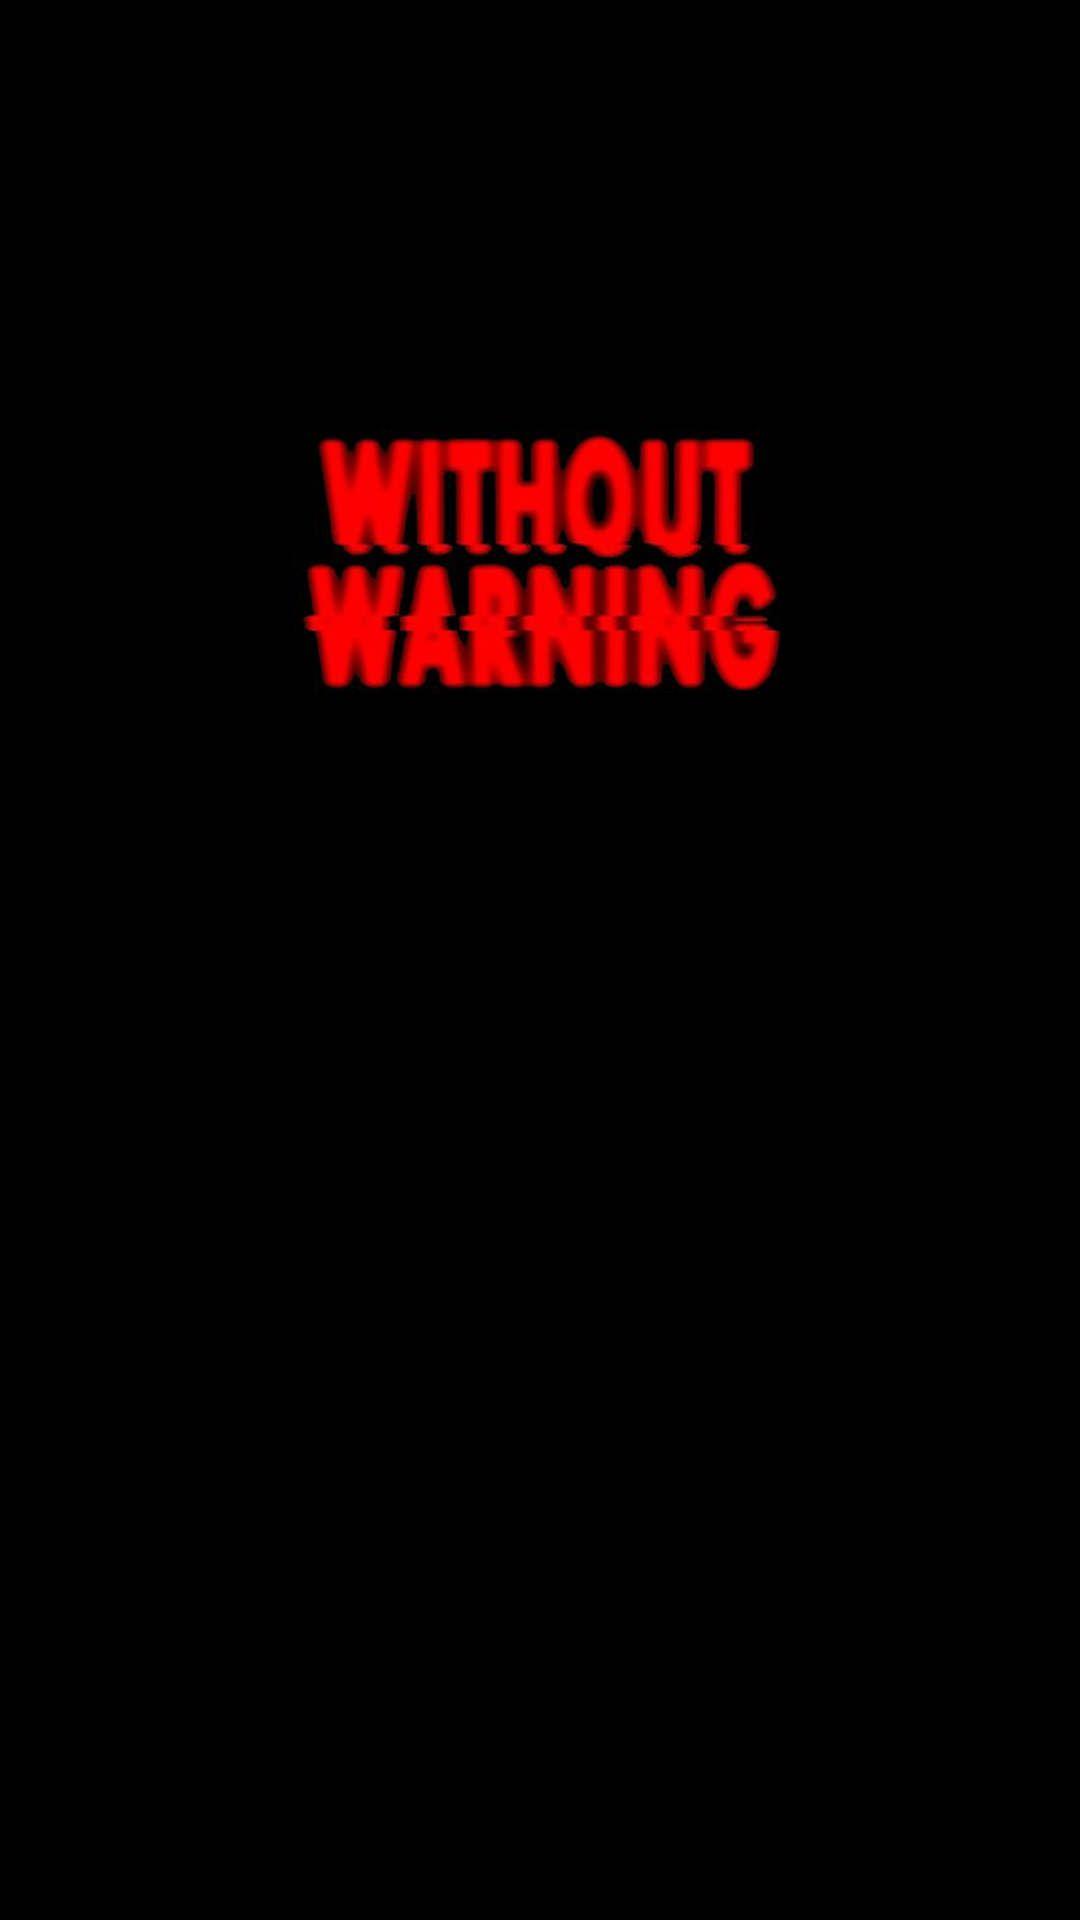 Warning Wallpaper  Download to your mobile from PHONEKY